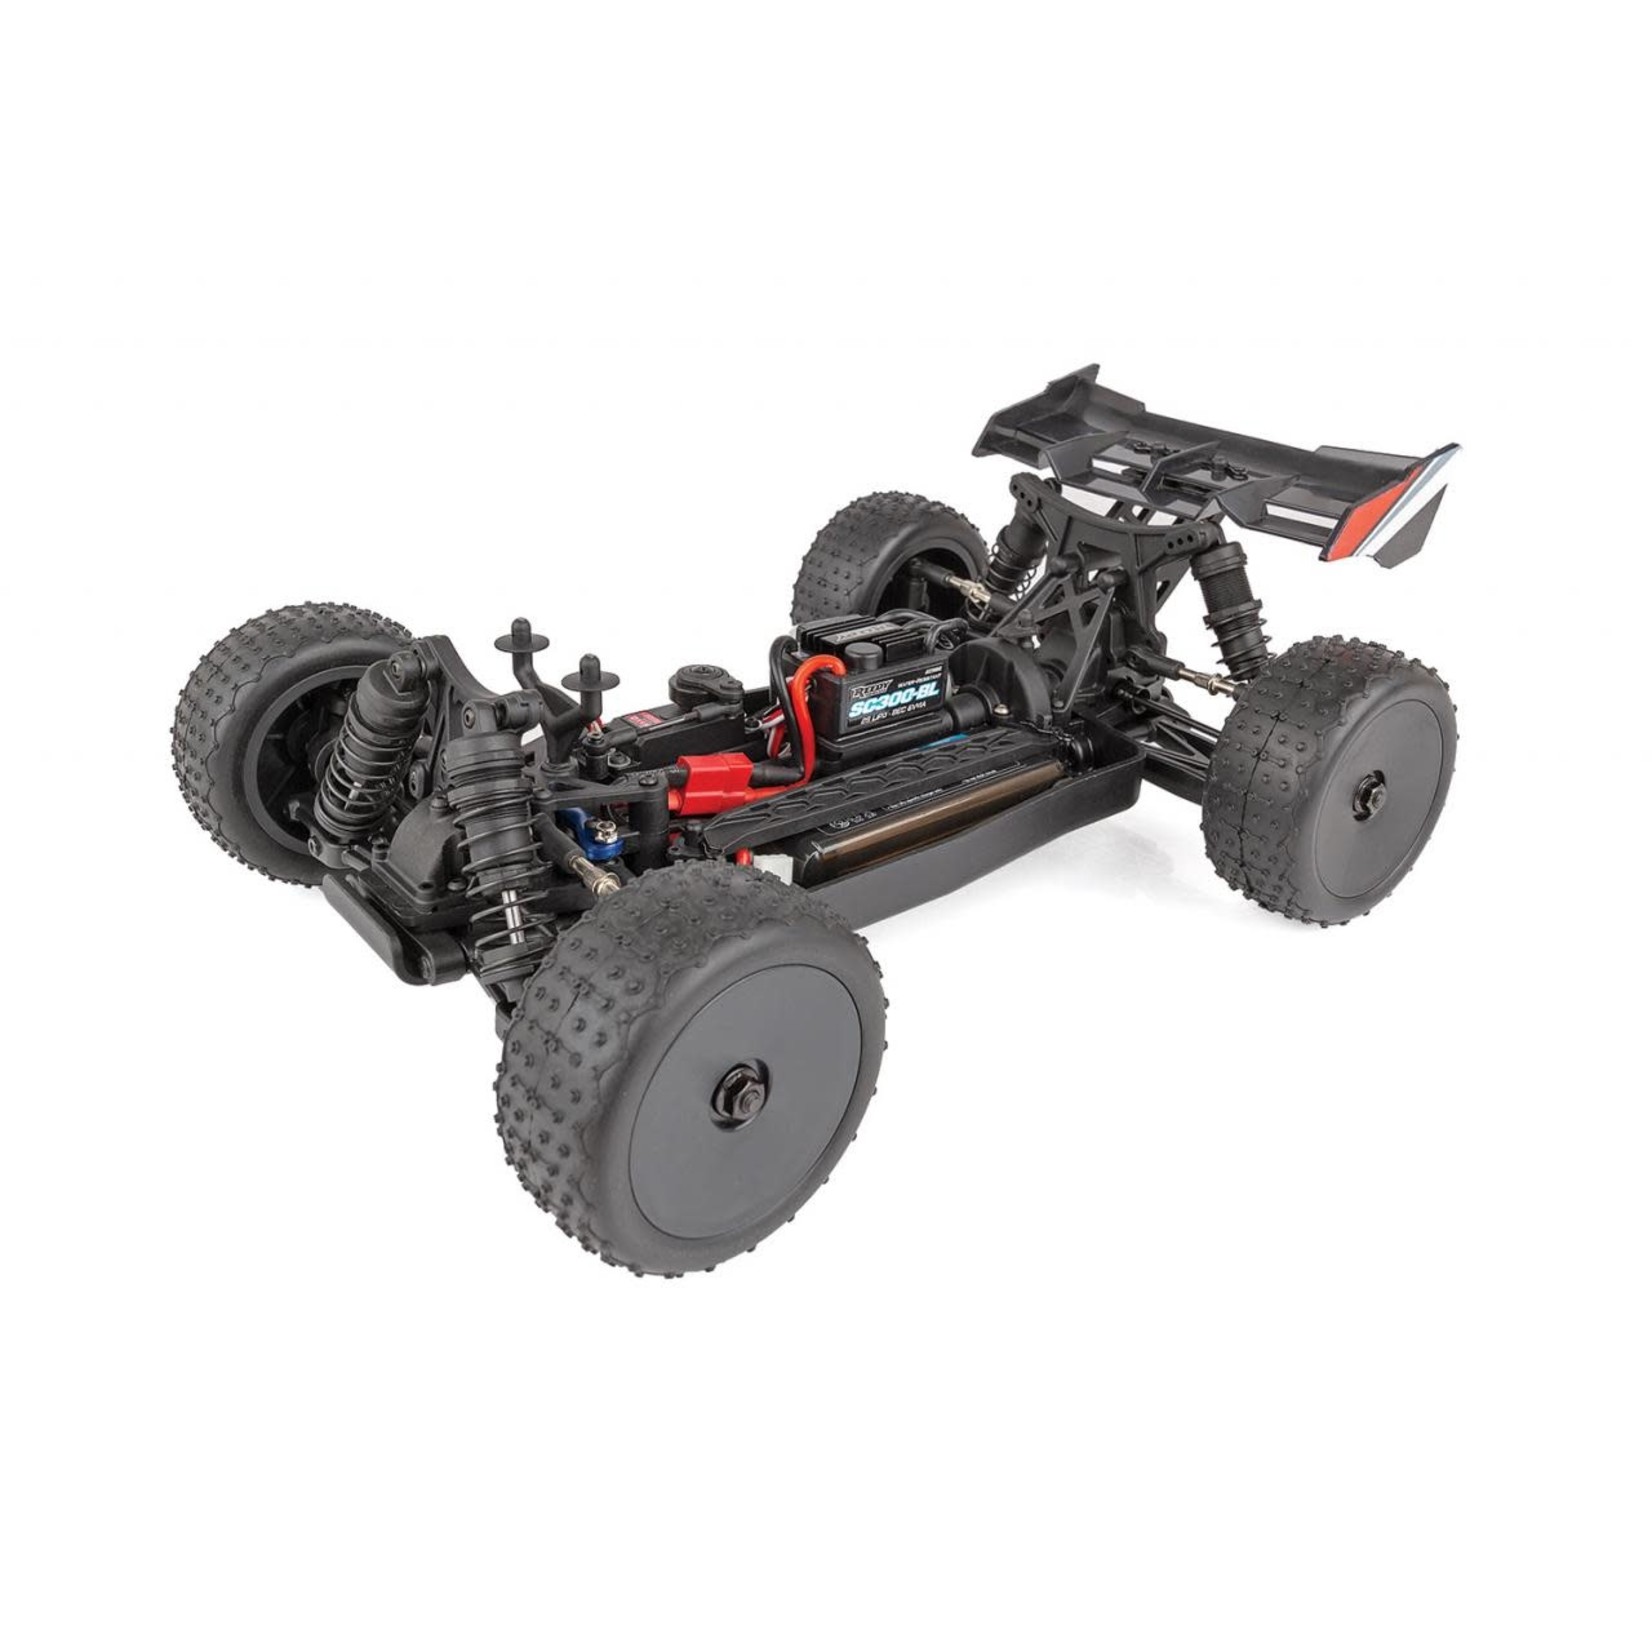 Team Associated Team Associated 20176C Reflex 14T RTR 1/14 Scale 4WD Truggy Combo w/2.4GHz Radio, Battery & Charger